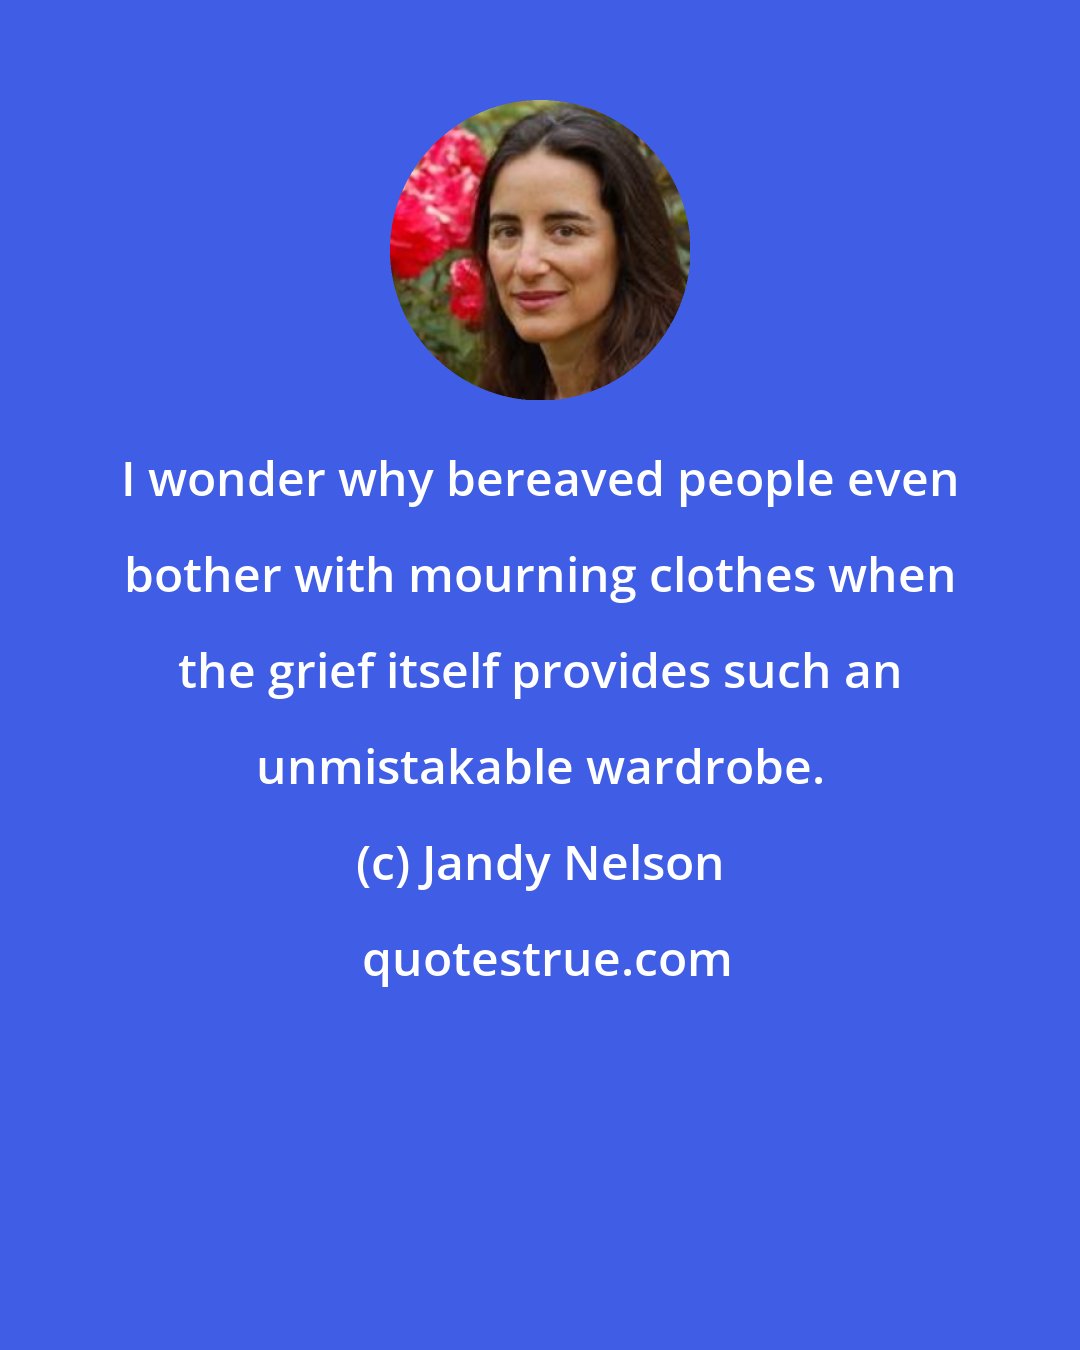 Jandy Nelson: I wonder why bereaved people even bother with mourning clothes when the grief itself provides such an unmistakable wardrobe.